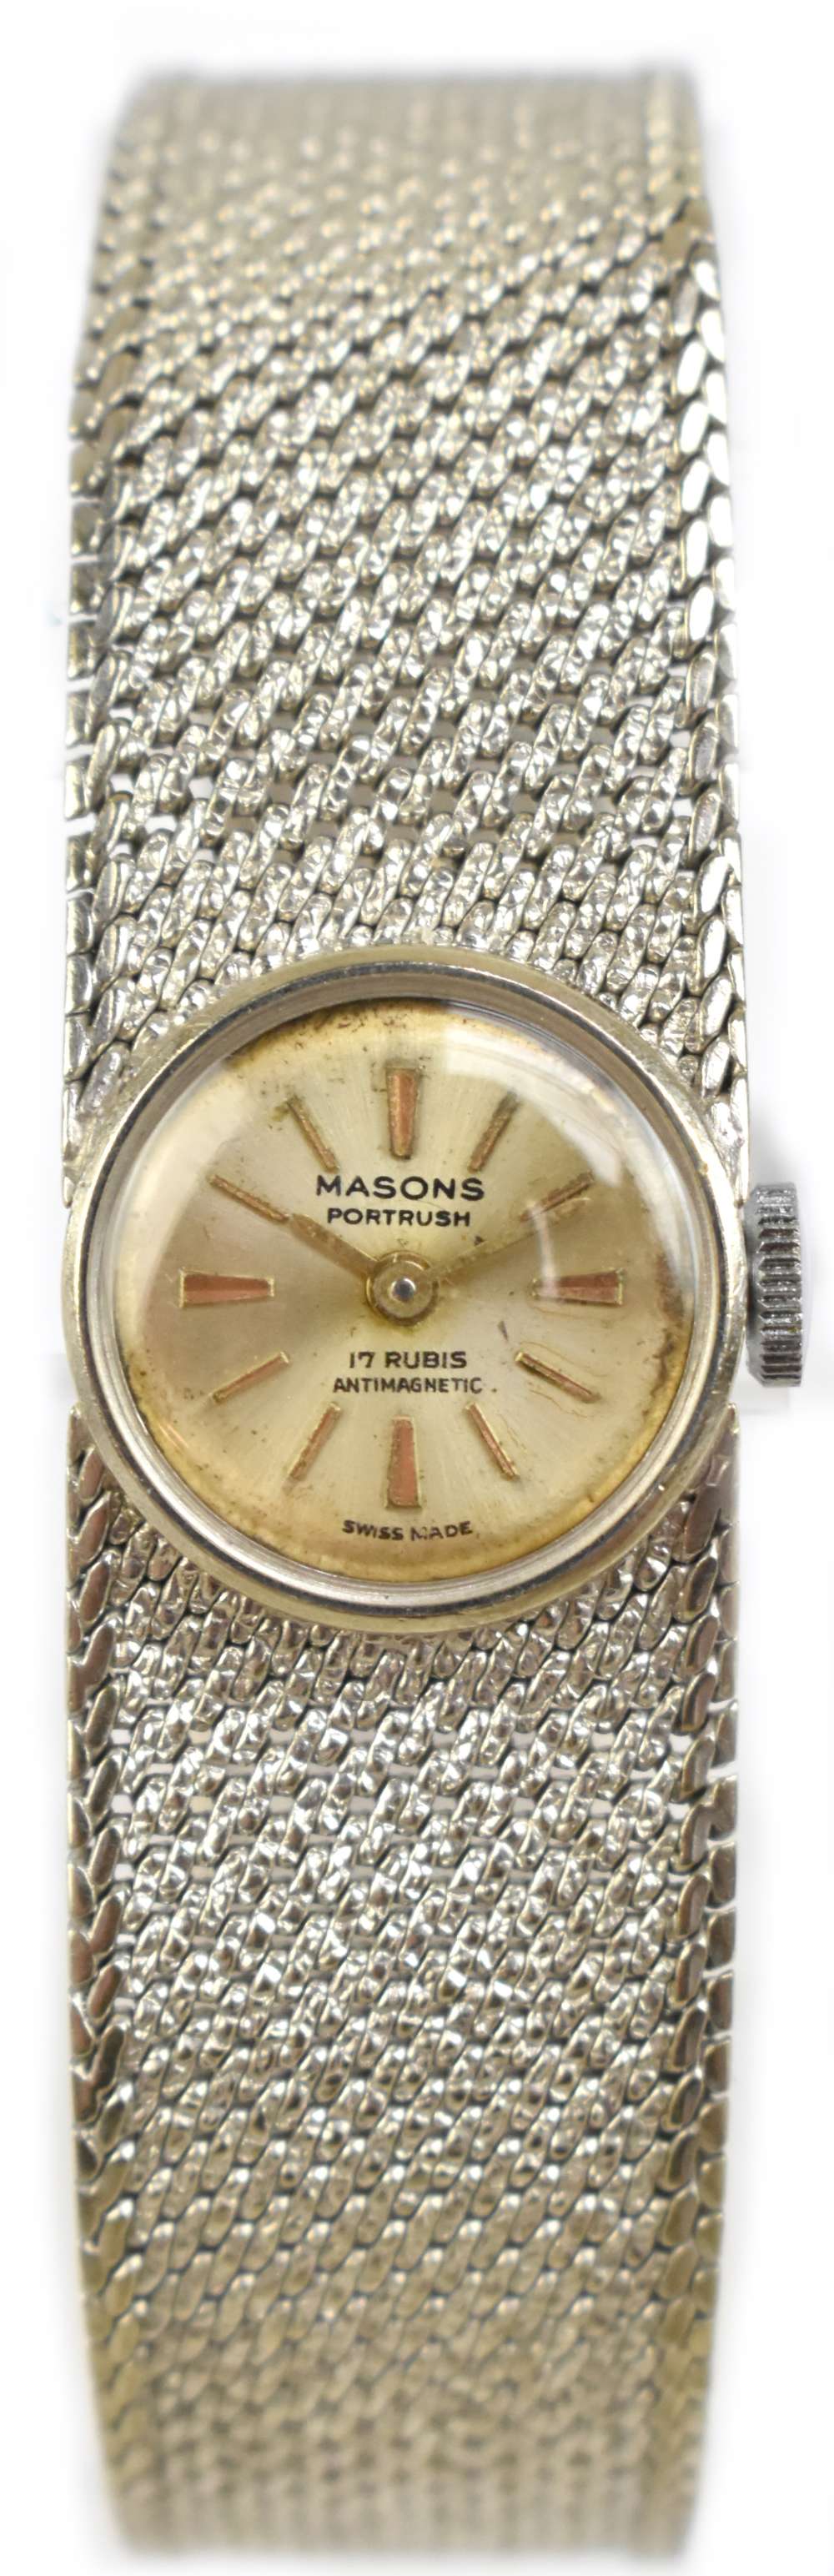 MASONS OF PORTRUSH; a lady's vintage 9ct white gold wristwatch with circular bracelet, length approx